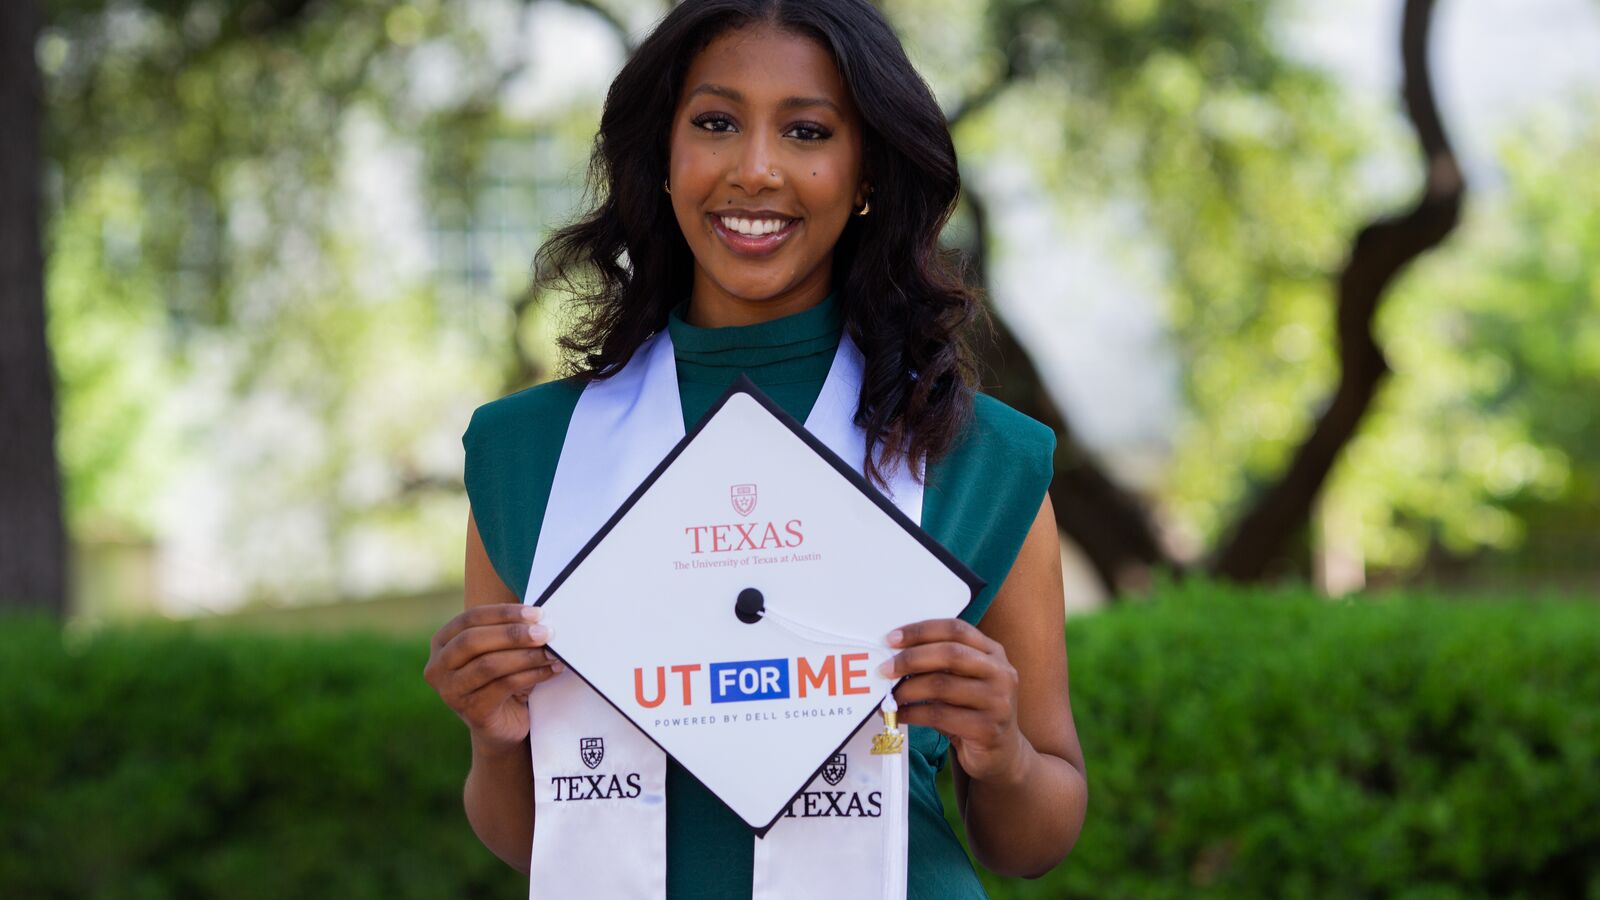 The University of Texas Expands Student Support to Close Graduation Gap